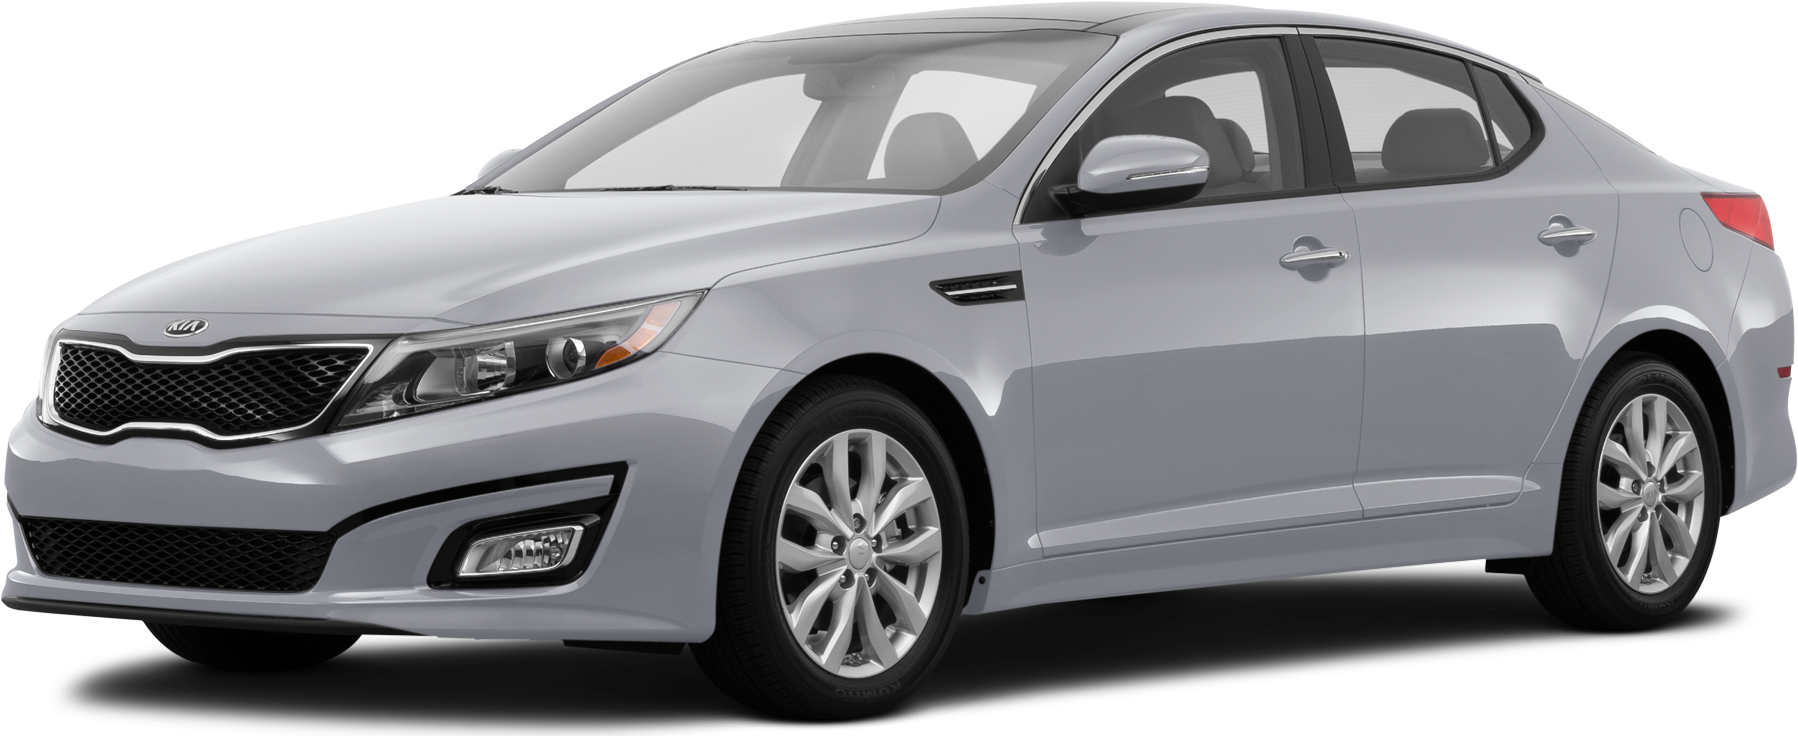 2014 Kia Optima Price Value Ratings And Reviews Kelley Blue Book